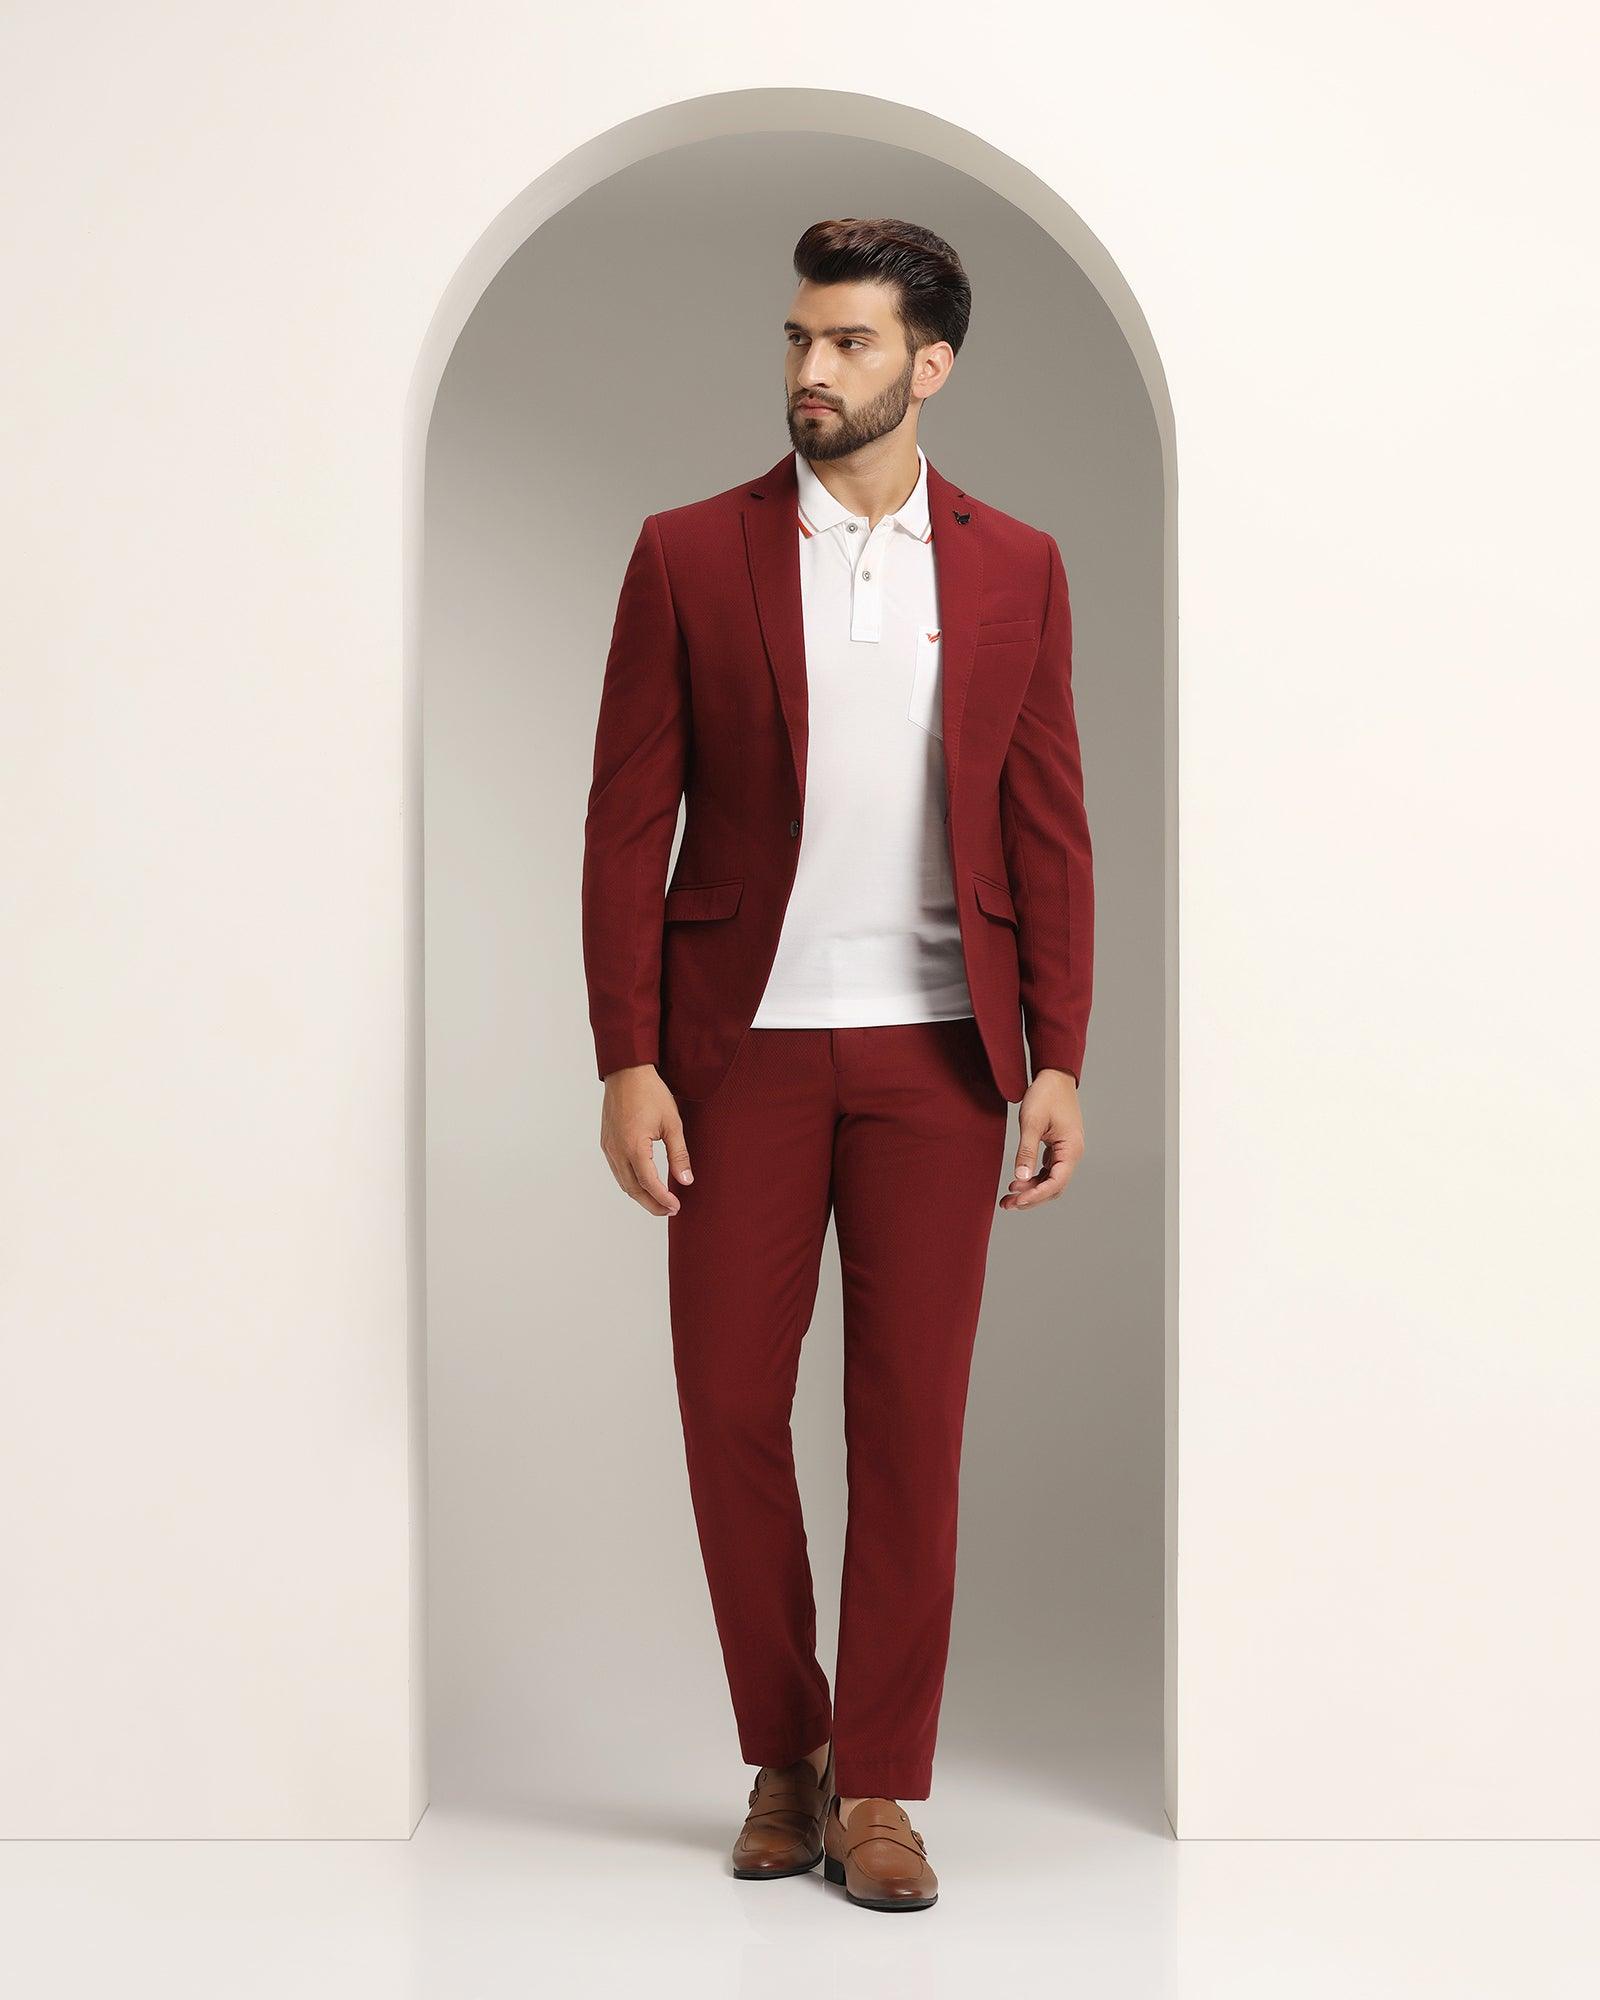 Top more than 172 shoes for maroon suit best